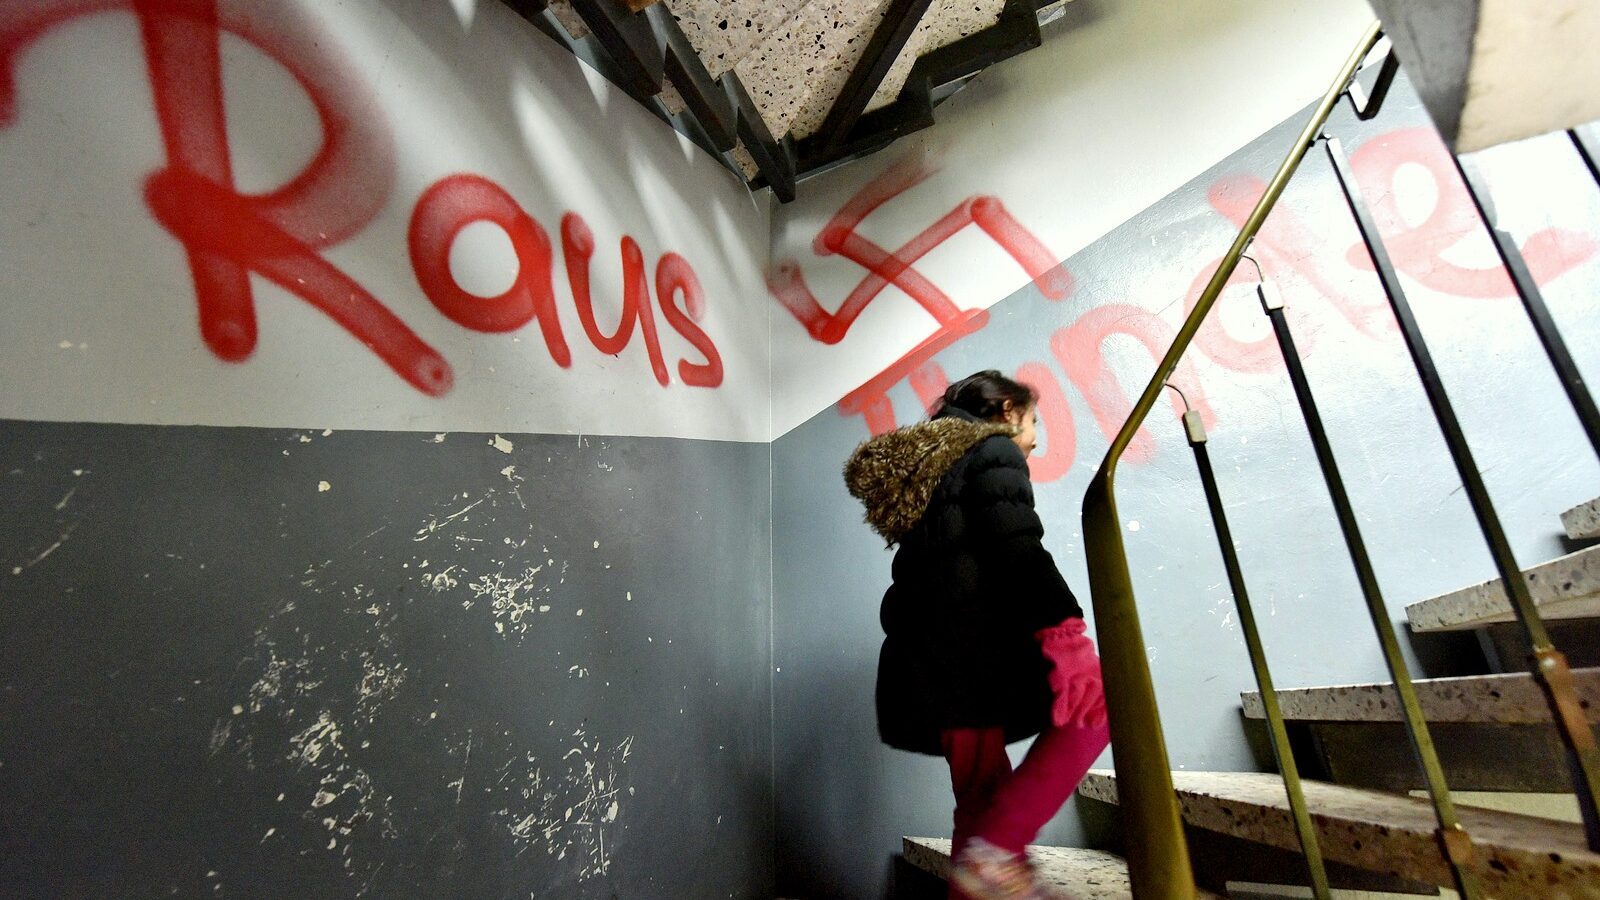 A refugee child walks on the stairway in a refugee housing in Waltrop, western Germany, painted with a swastika graffiti and a writing "get out dogs", Tuesday, Oct. 13, 2015. Unknown persons sprayed extremist anti refugee graffities on and in several refugee homes in the city the night before. (AP Photo/Martin Meissner)